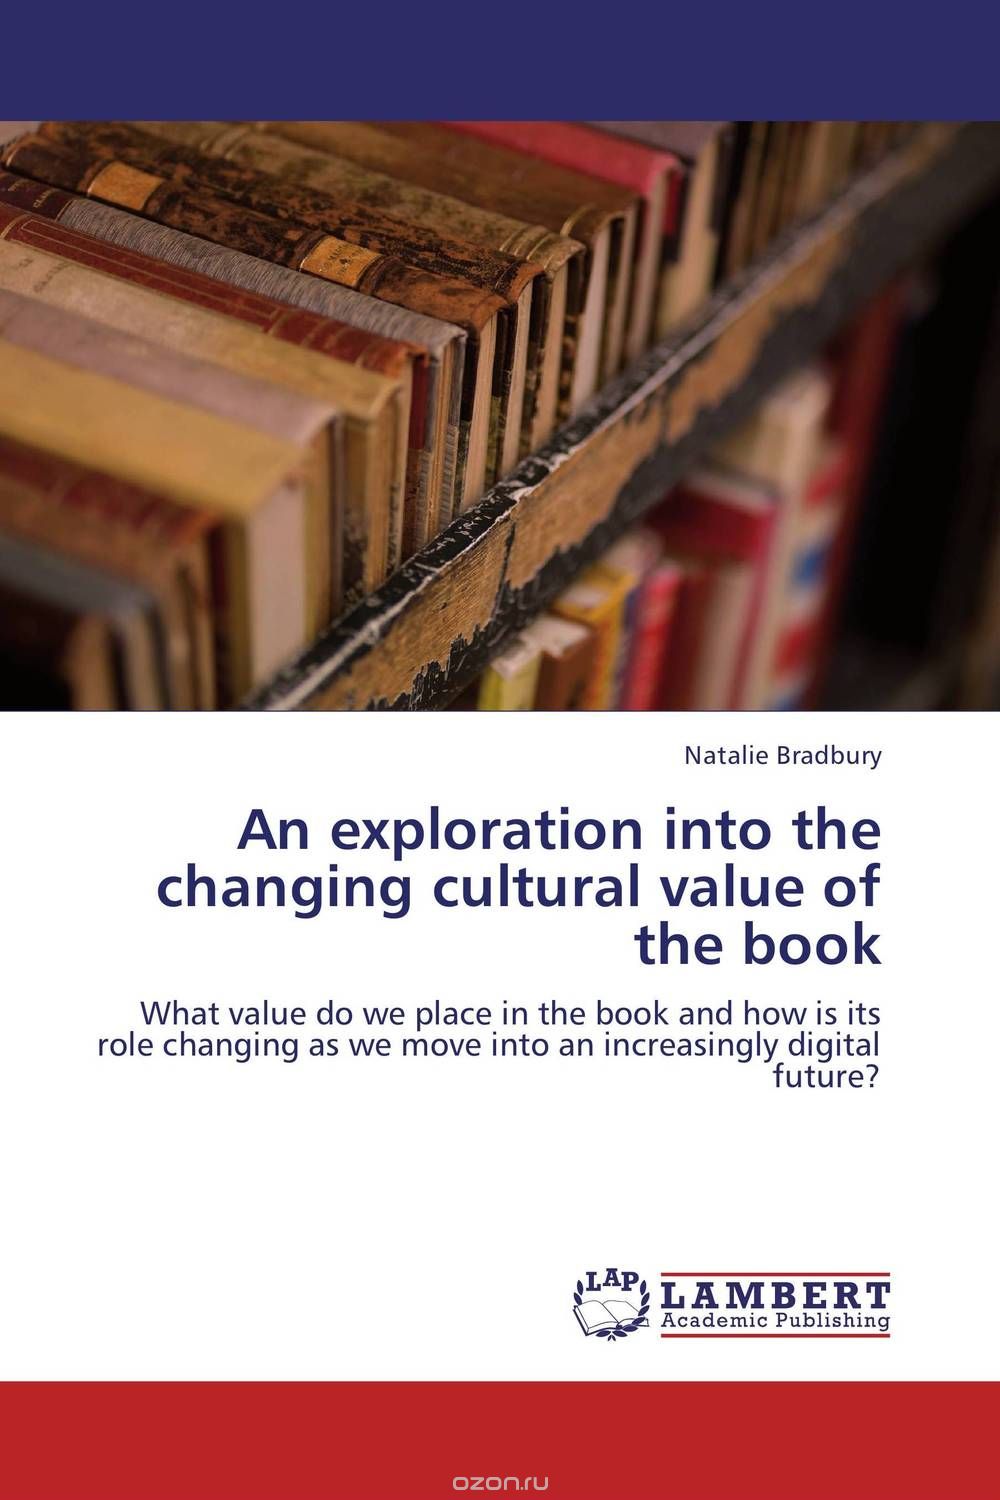 Скачать книгу "An exploration into the changing cultural value of the book"